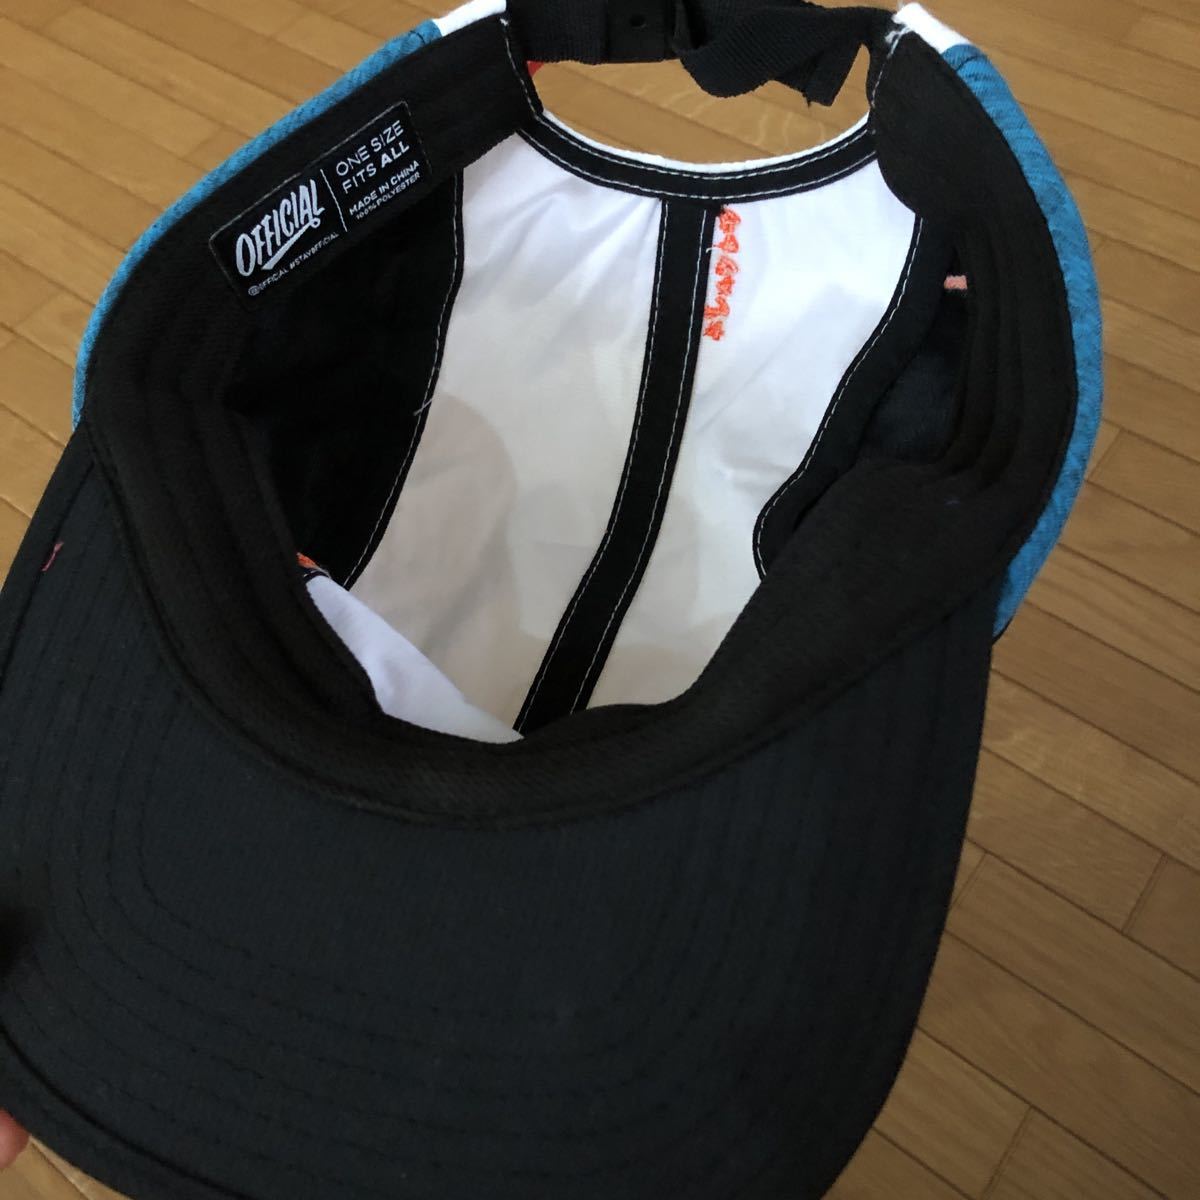  official cap considerably beautiful goods is light ...official hat warmth avoid . tennis running land walk sport sea river .